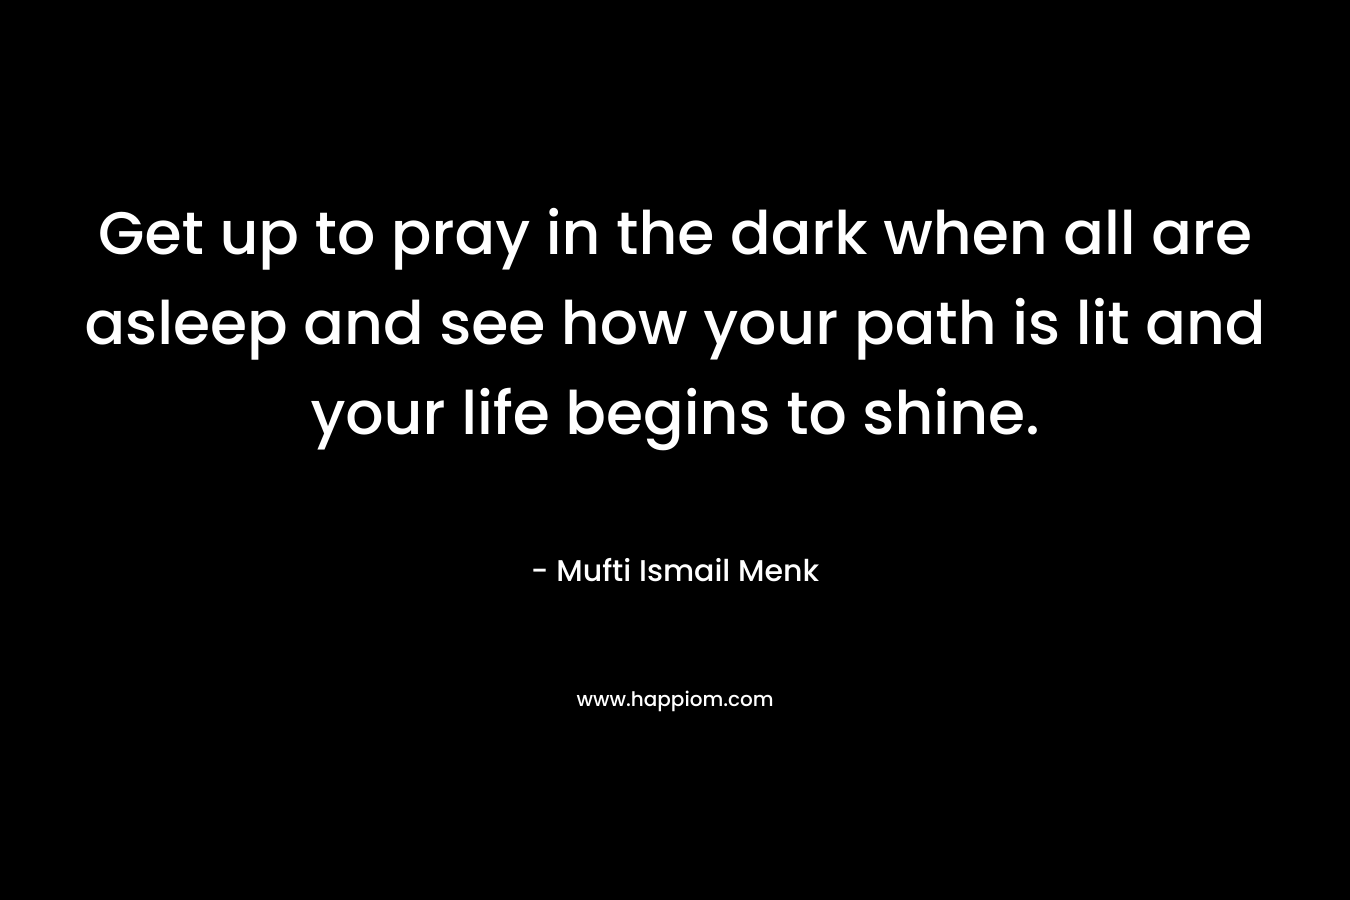 Get up to pray in the dark when all are asleep and see how your path is lit and your life begins to shine.